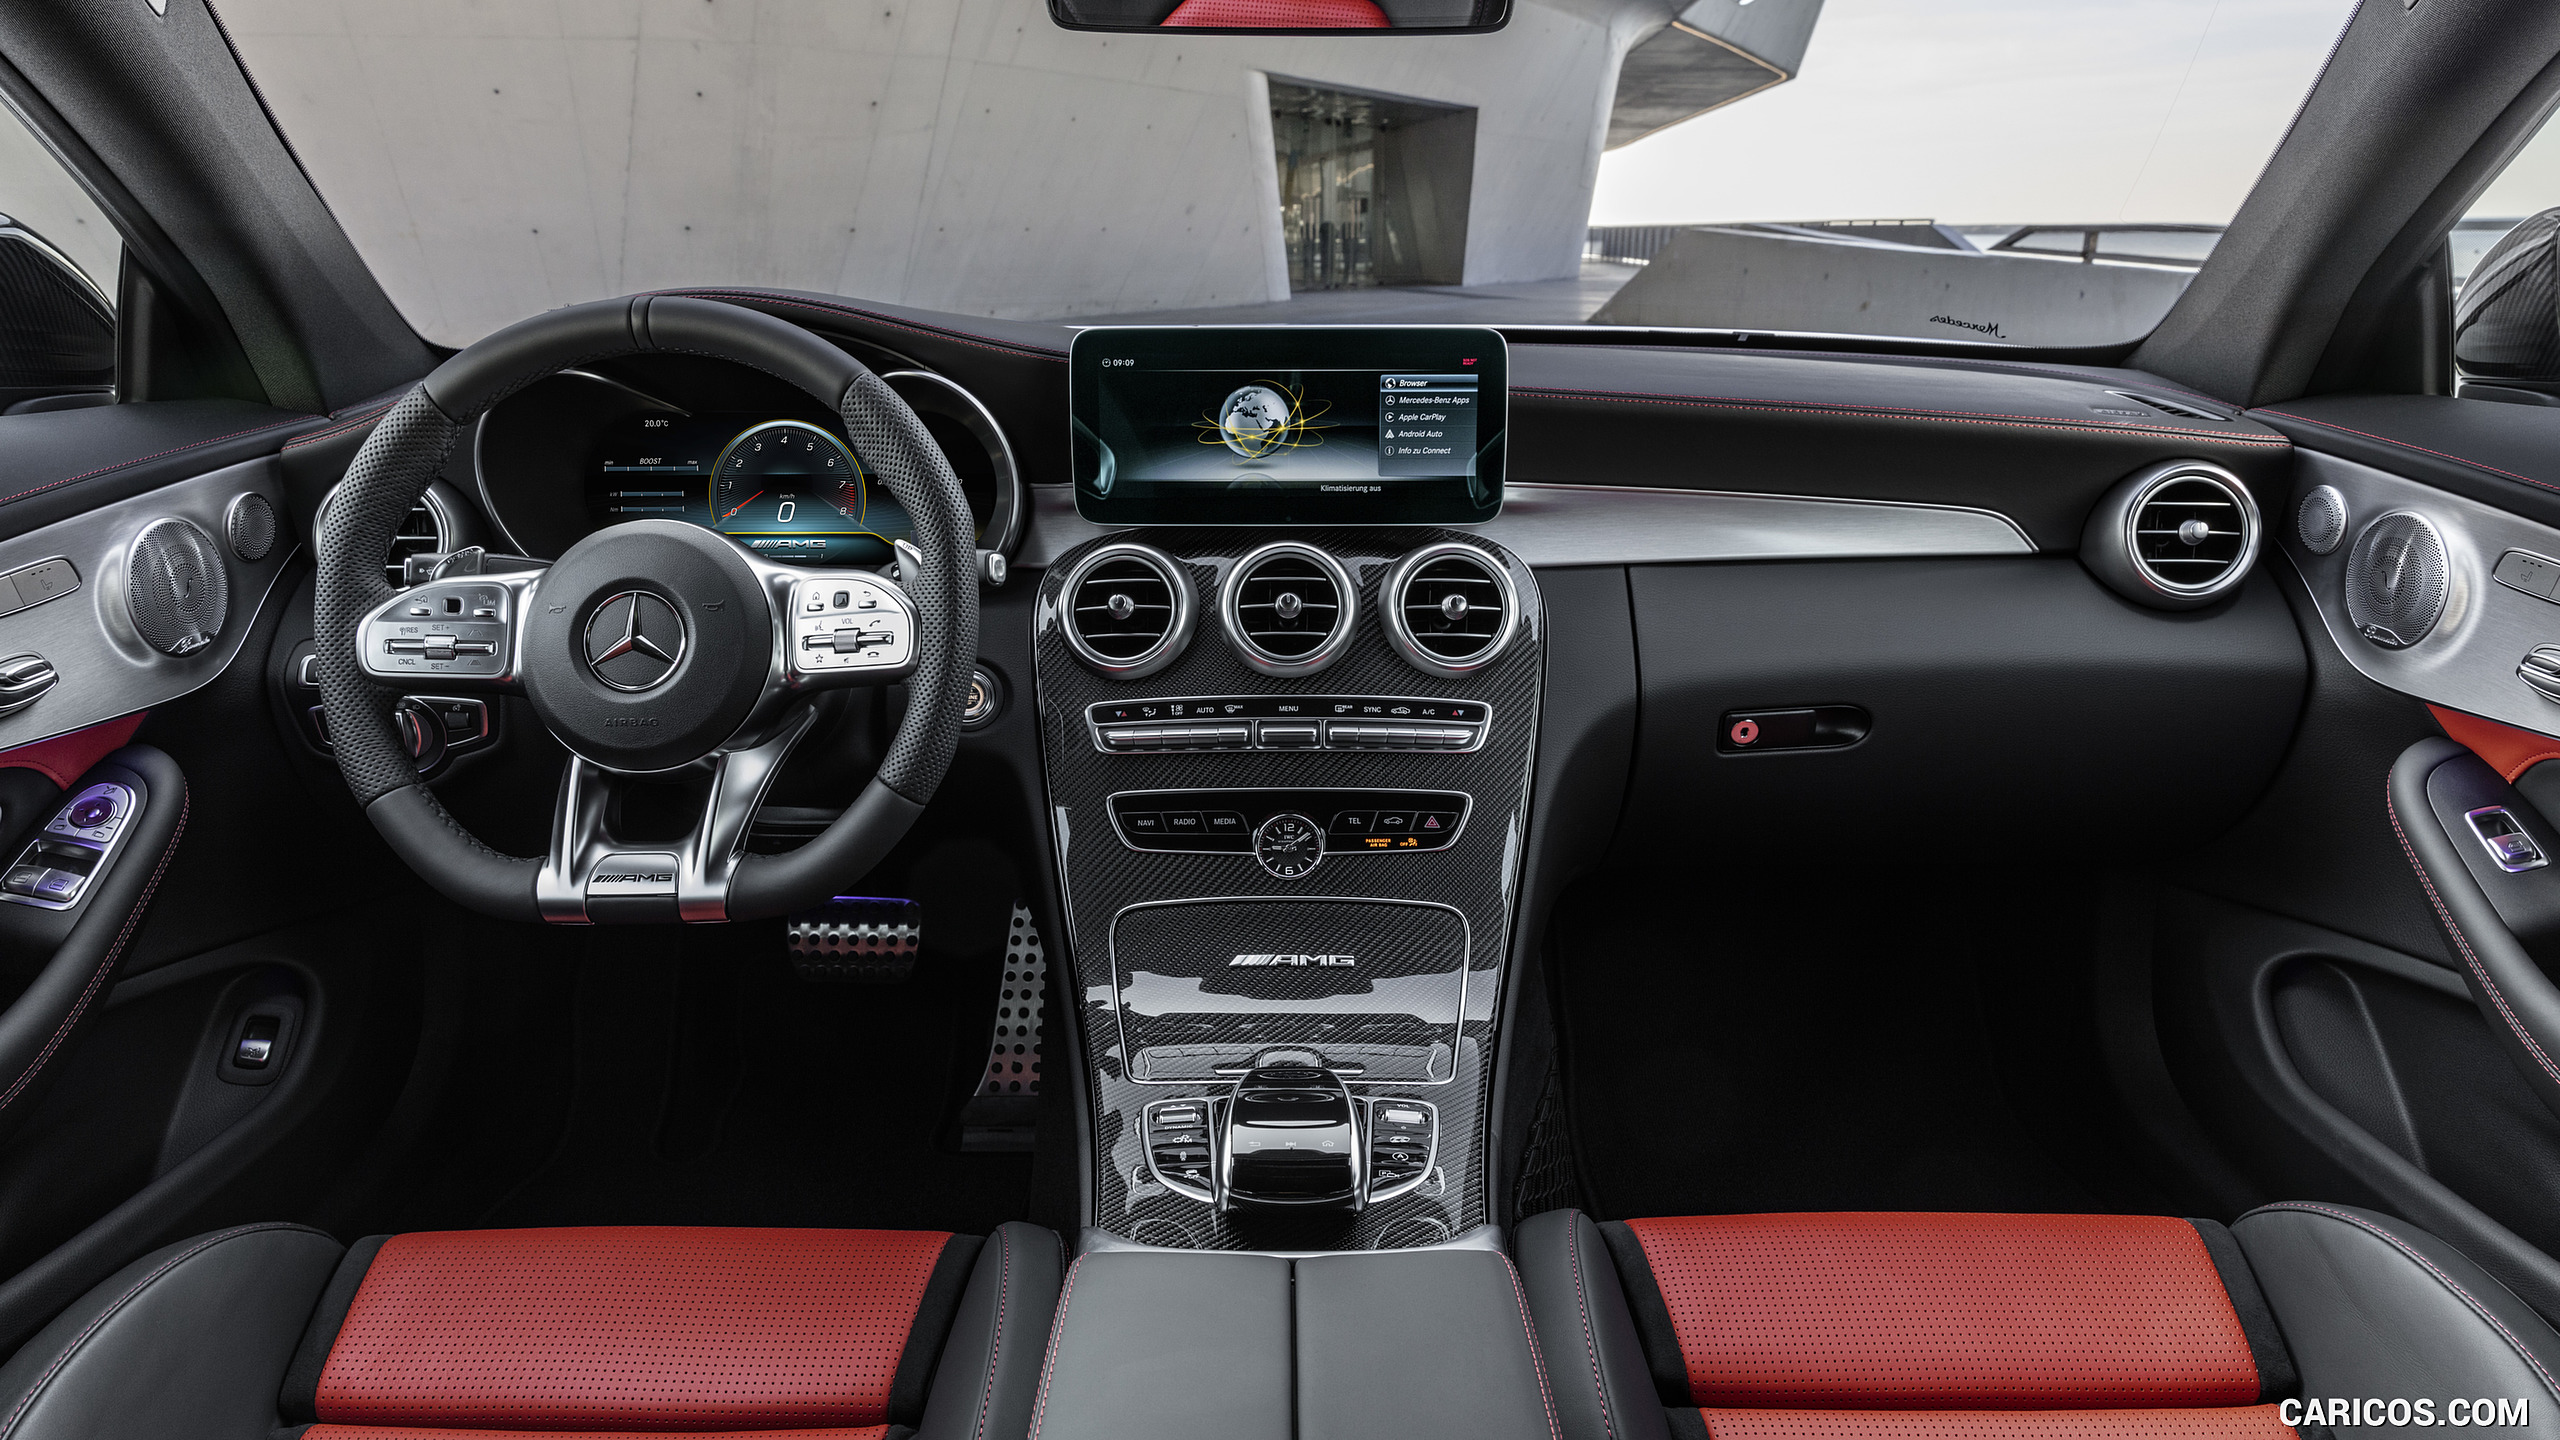 2019 Mercedes-AMG C 63 S Coupe - Interior, Cockpit, #25 of 106